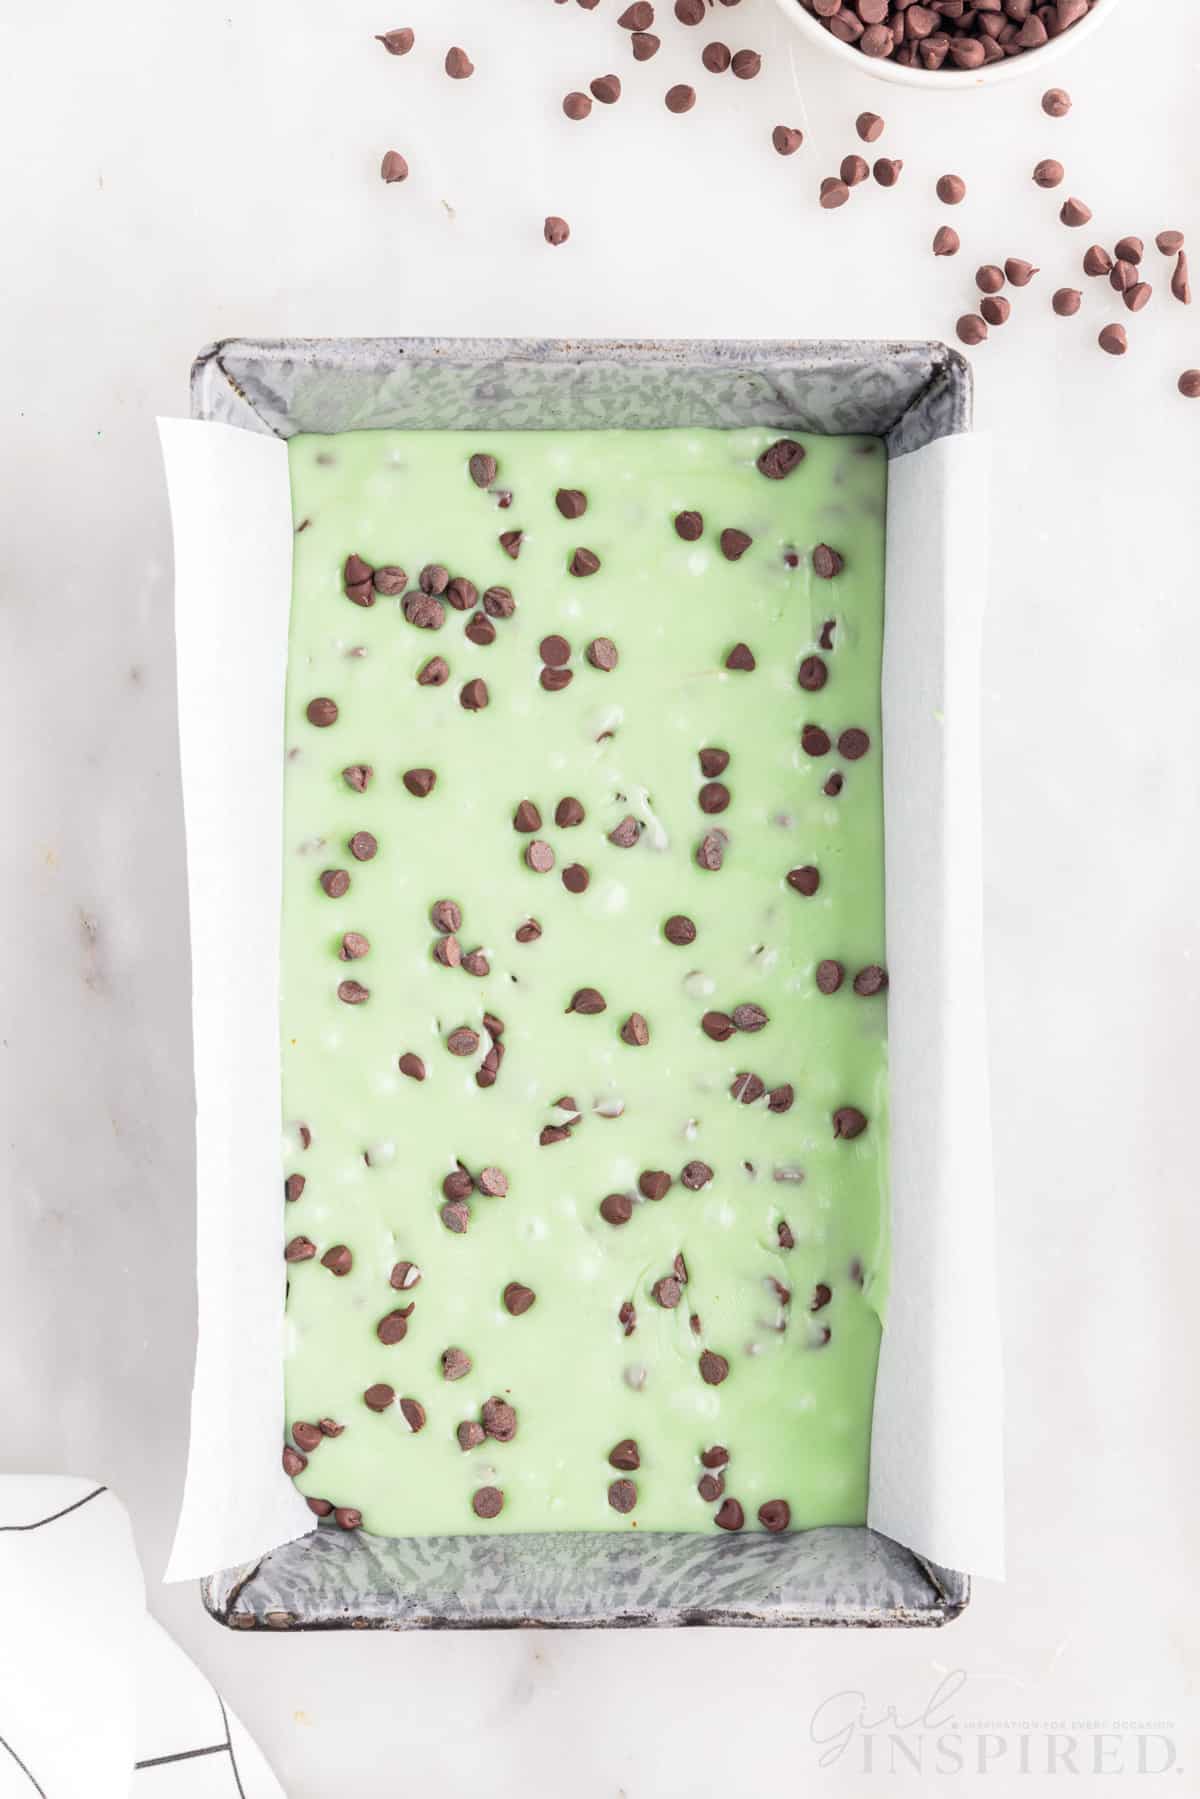 mint chocolate chip fudge in a loaf pan